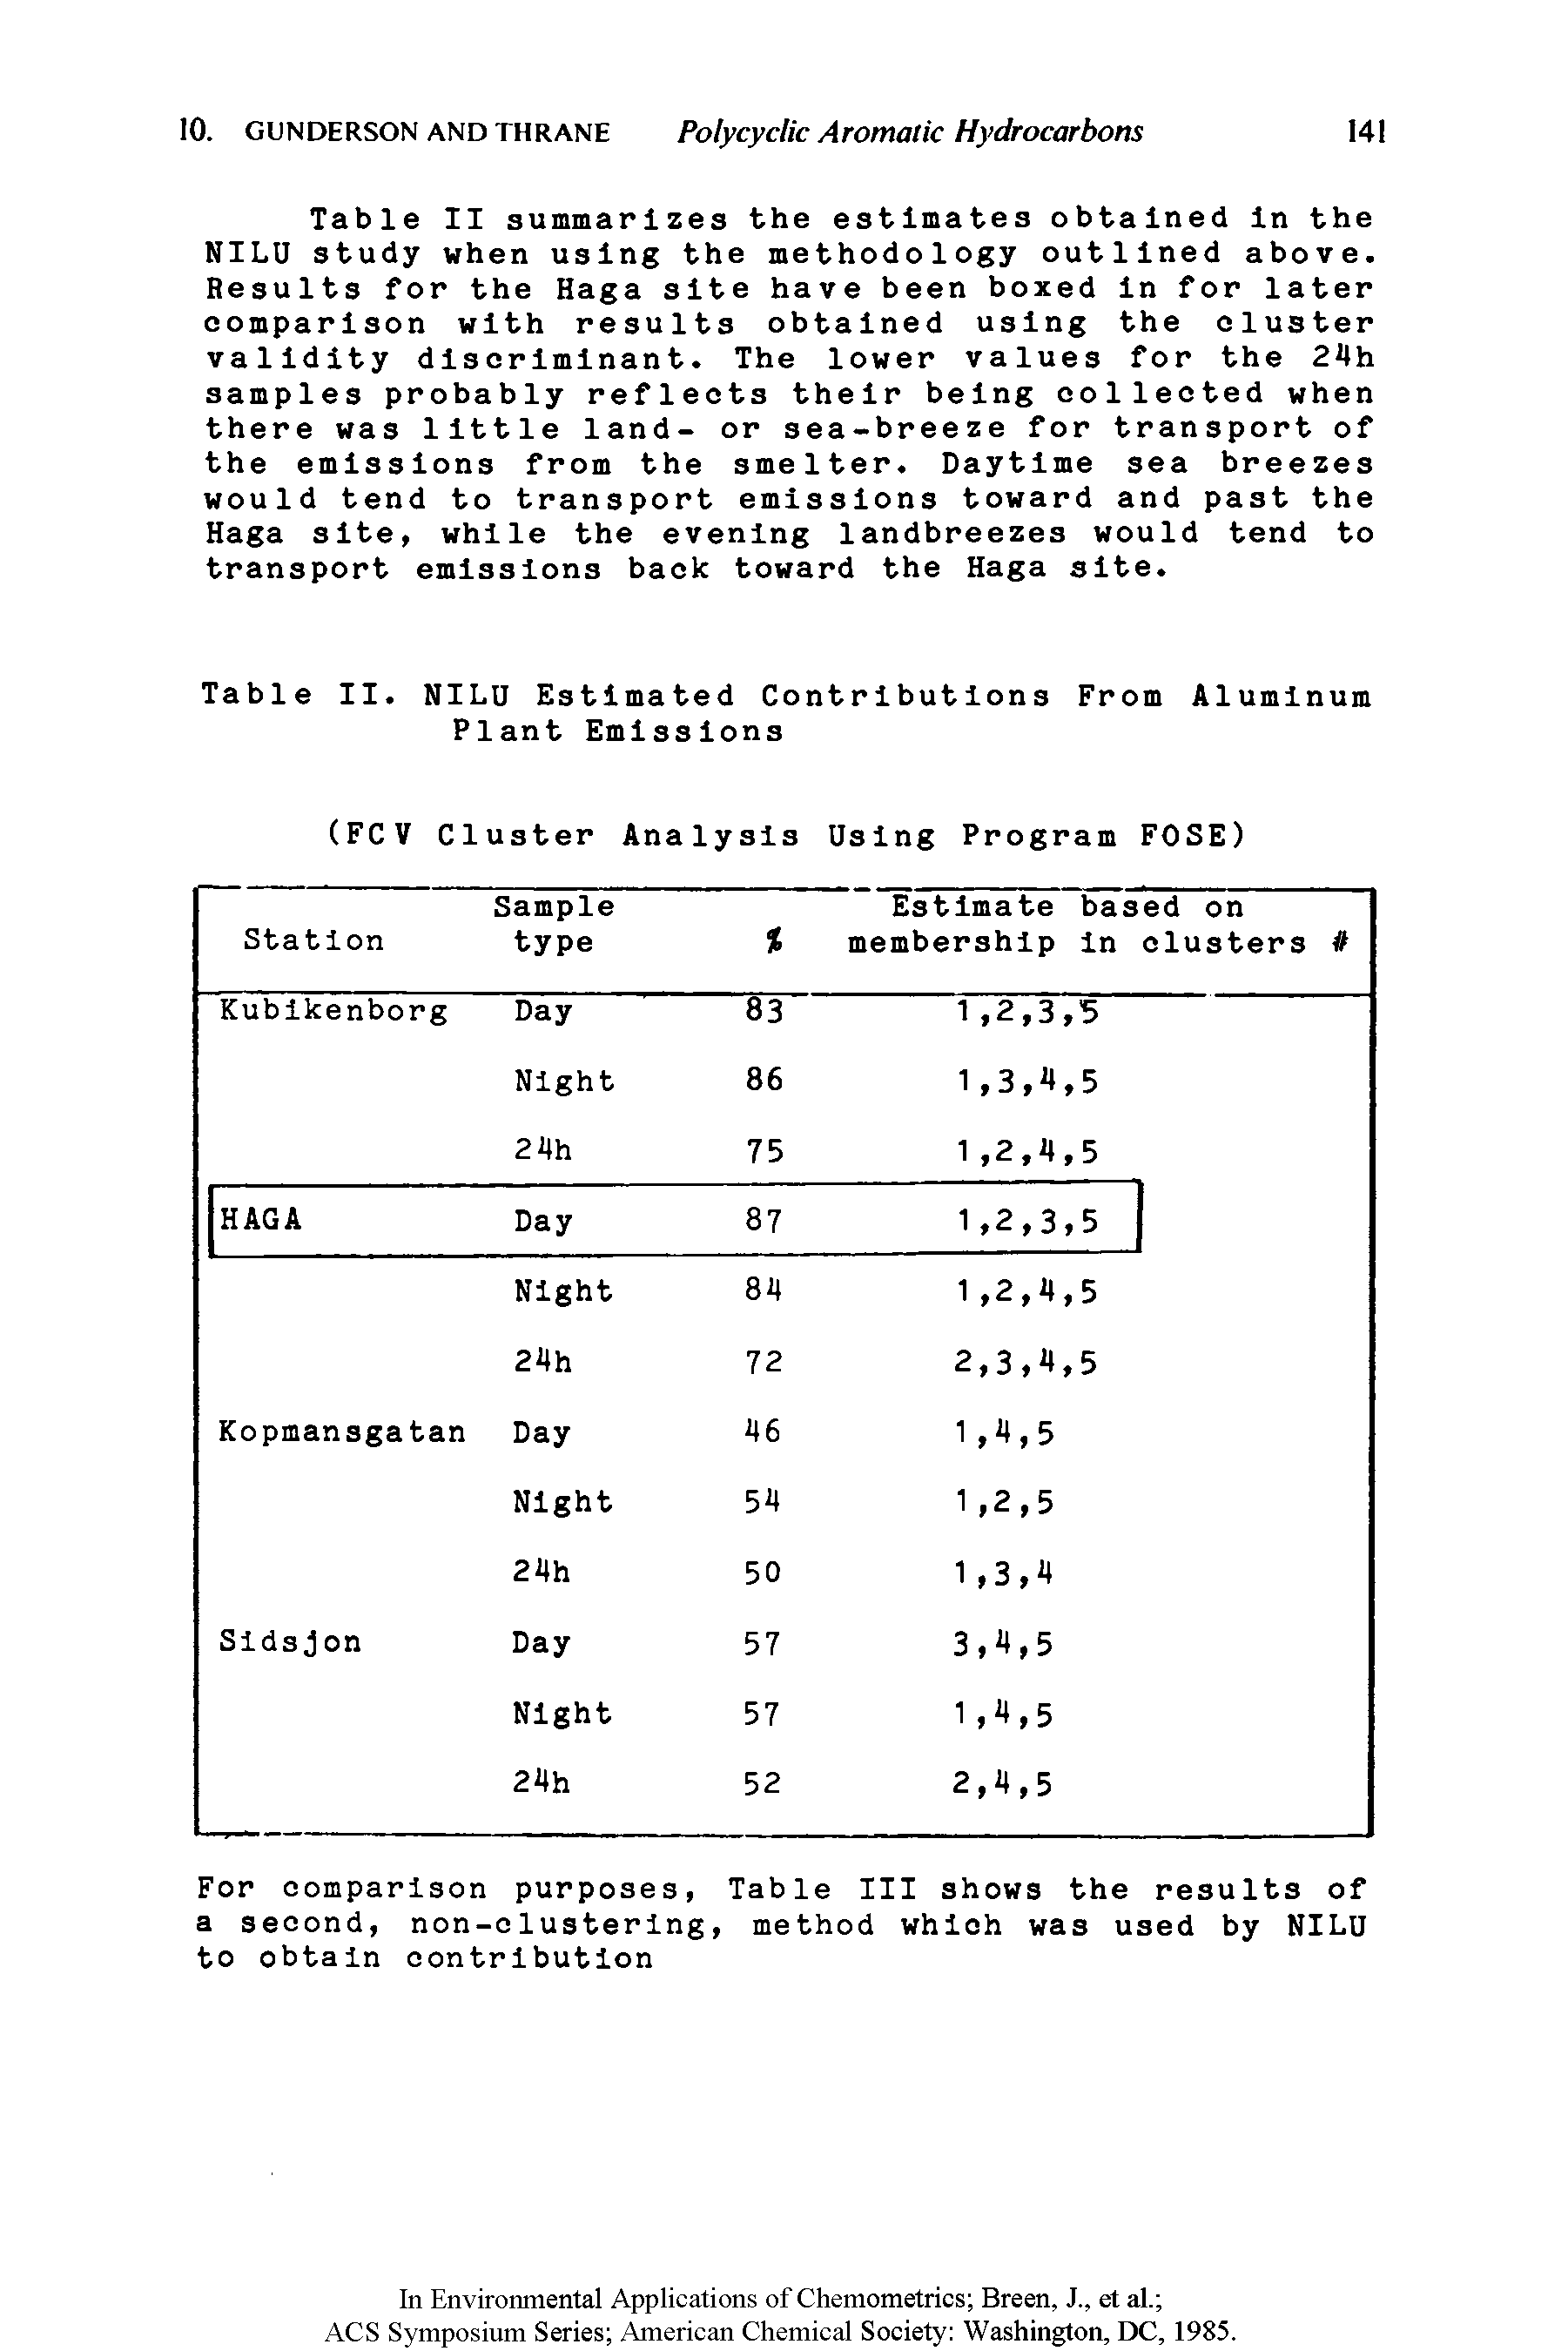 Table II summarizes the estimates obtained In the NILU study when using the methodology outlined above. Results for the Haga site have been boxed In for later comparison with results obtained using the cluster validity discriminant. The lower values for the 24h samples probably reflects their being collected when there was little land- or sea-breeze for transport of the emissions from the smelter. Daytime sea breezes would tend to transport emissions toward and past the Haga site, while the evening landbreezes would tend to transport emissions back toward the Haga site.